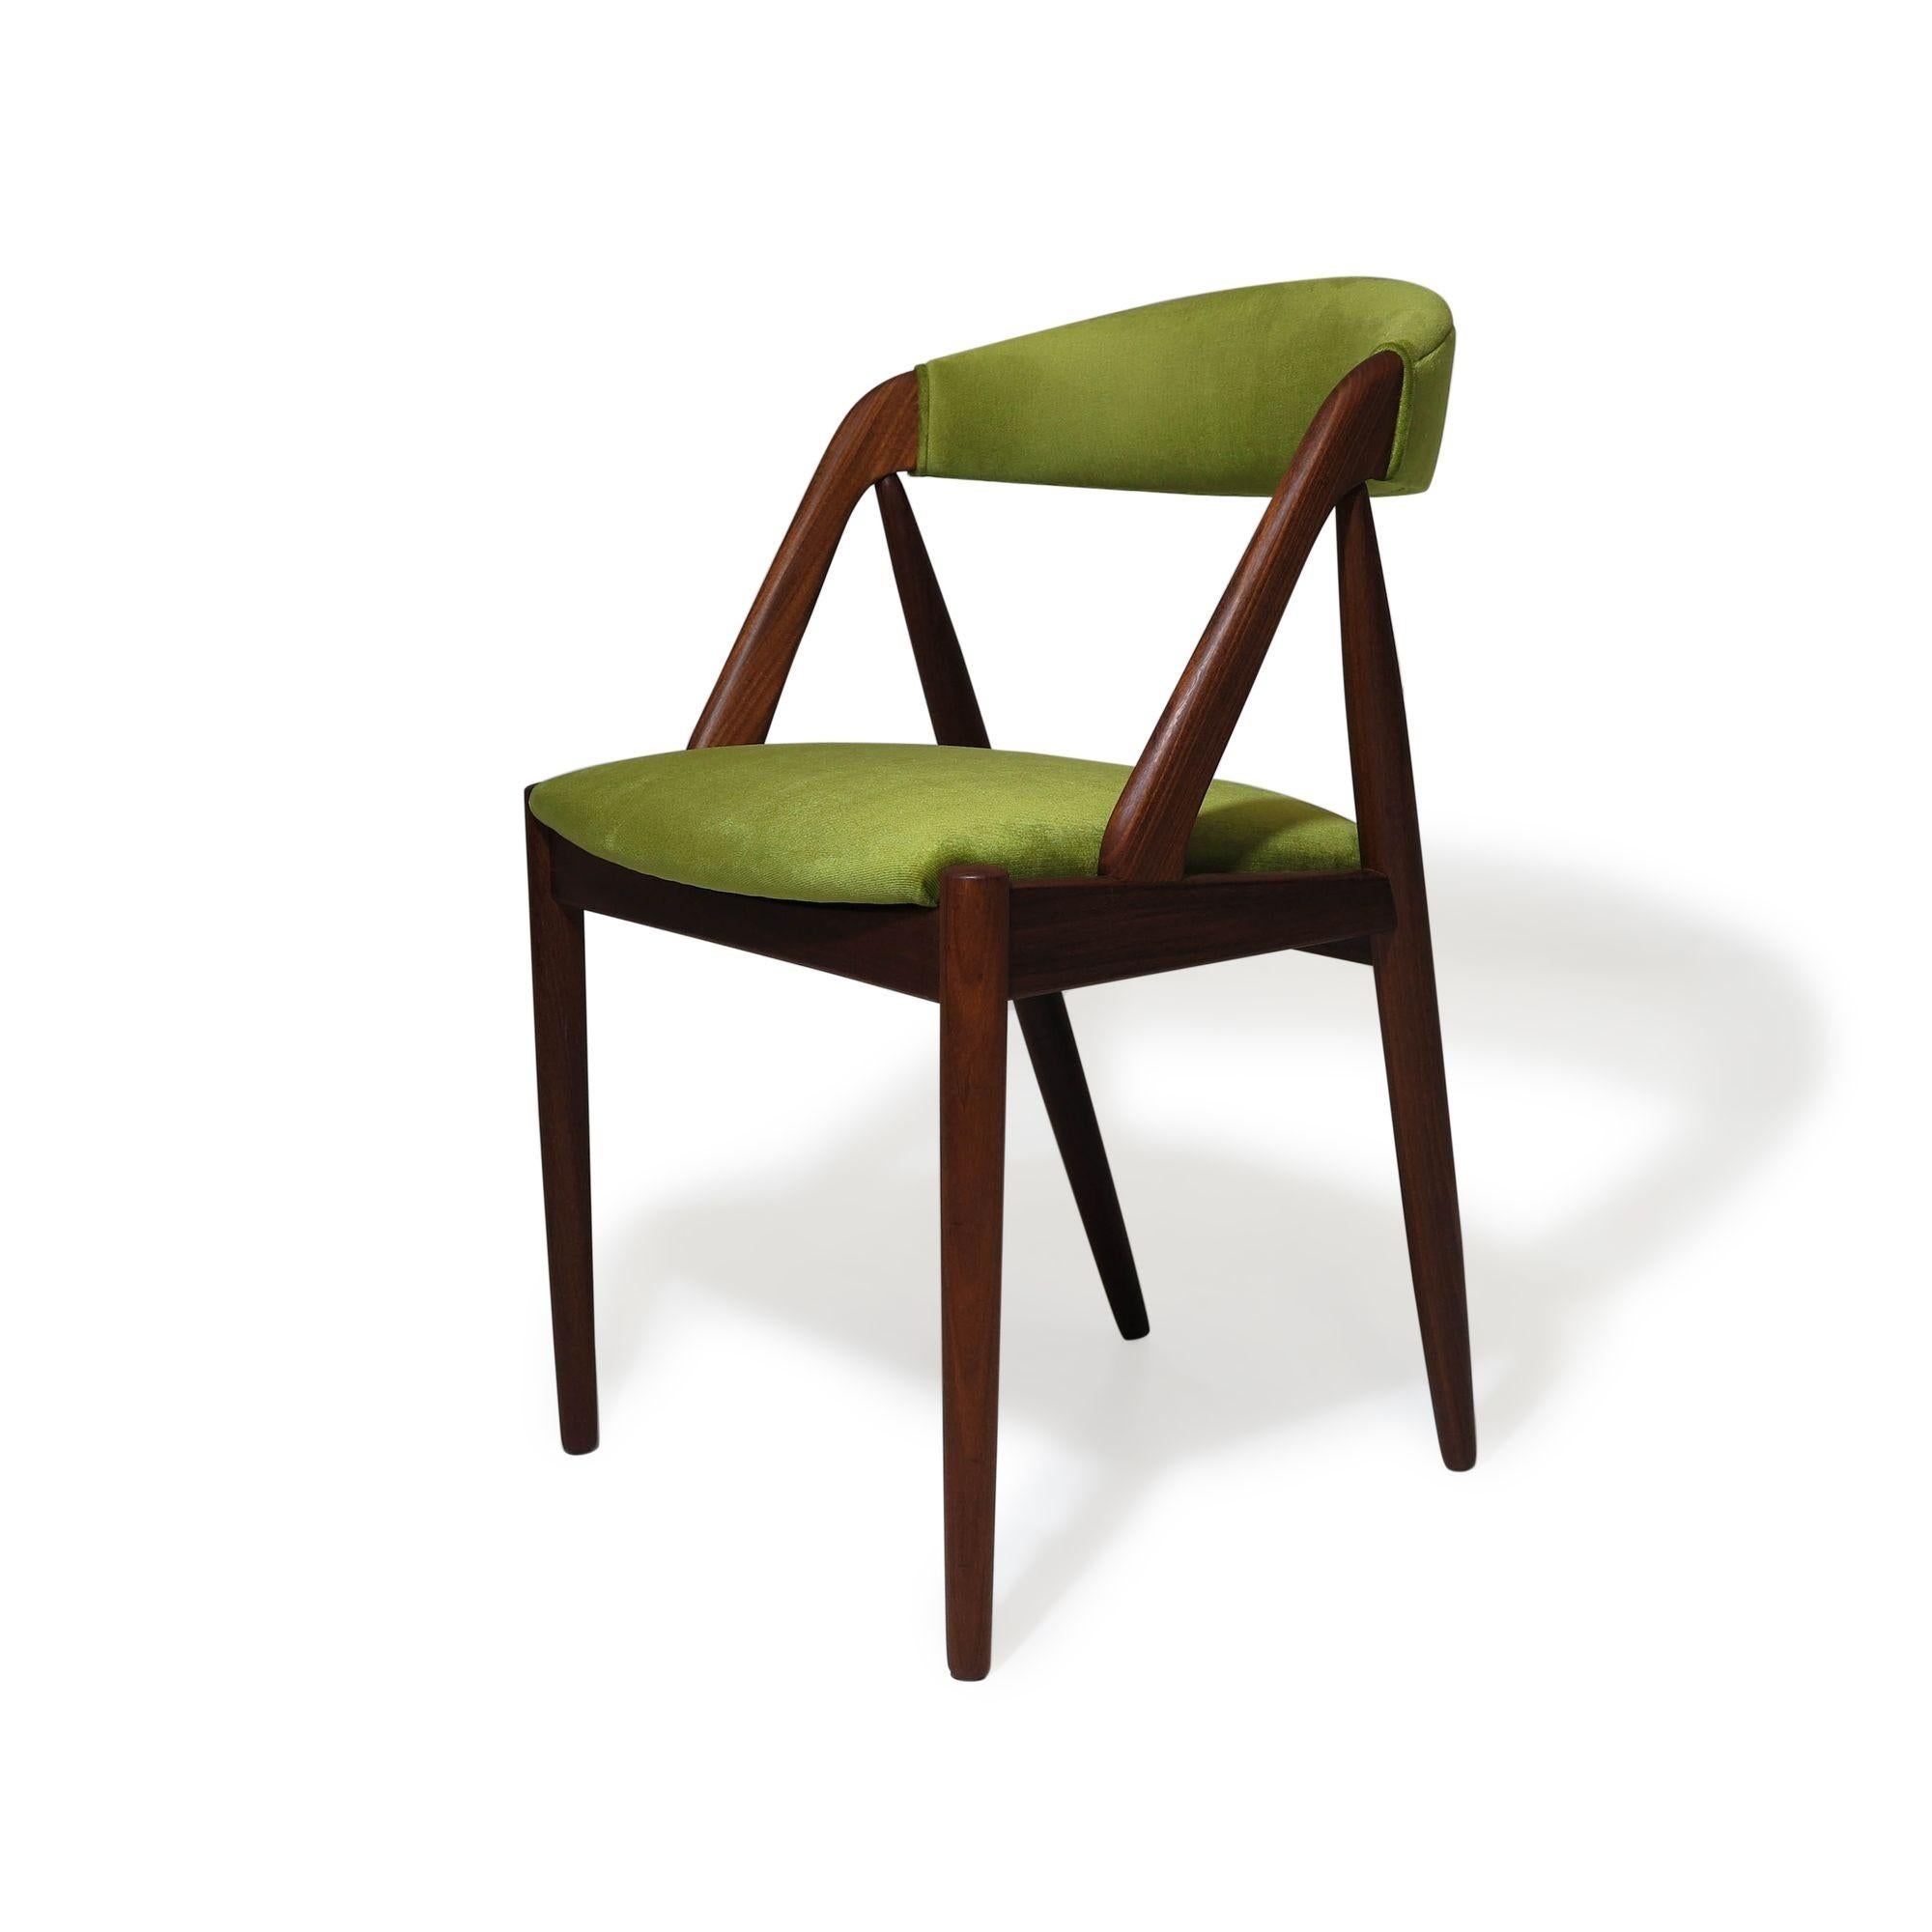 midcentury Danish dining chairs designed by Kai Kristiansen for Schou Andersen, Model 31. The chairs feature solid walnut frames with comfortable and supportive back rests; newly upholstered in a lime green velvet upholstery, over new foam and new